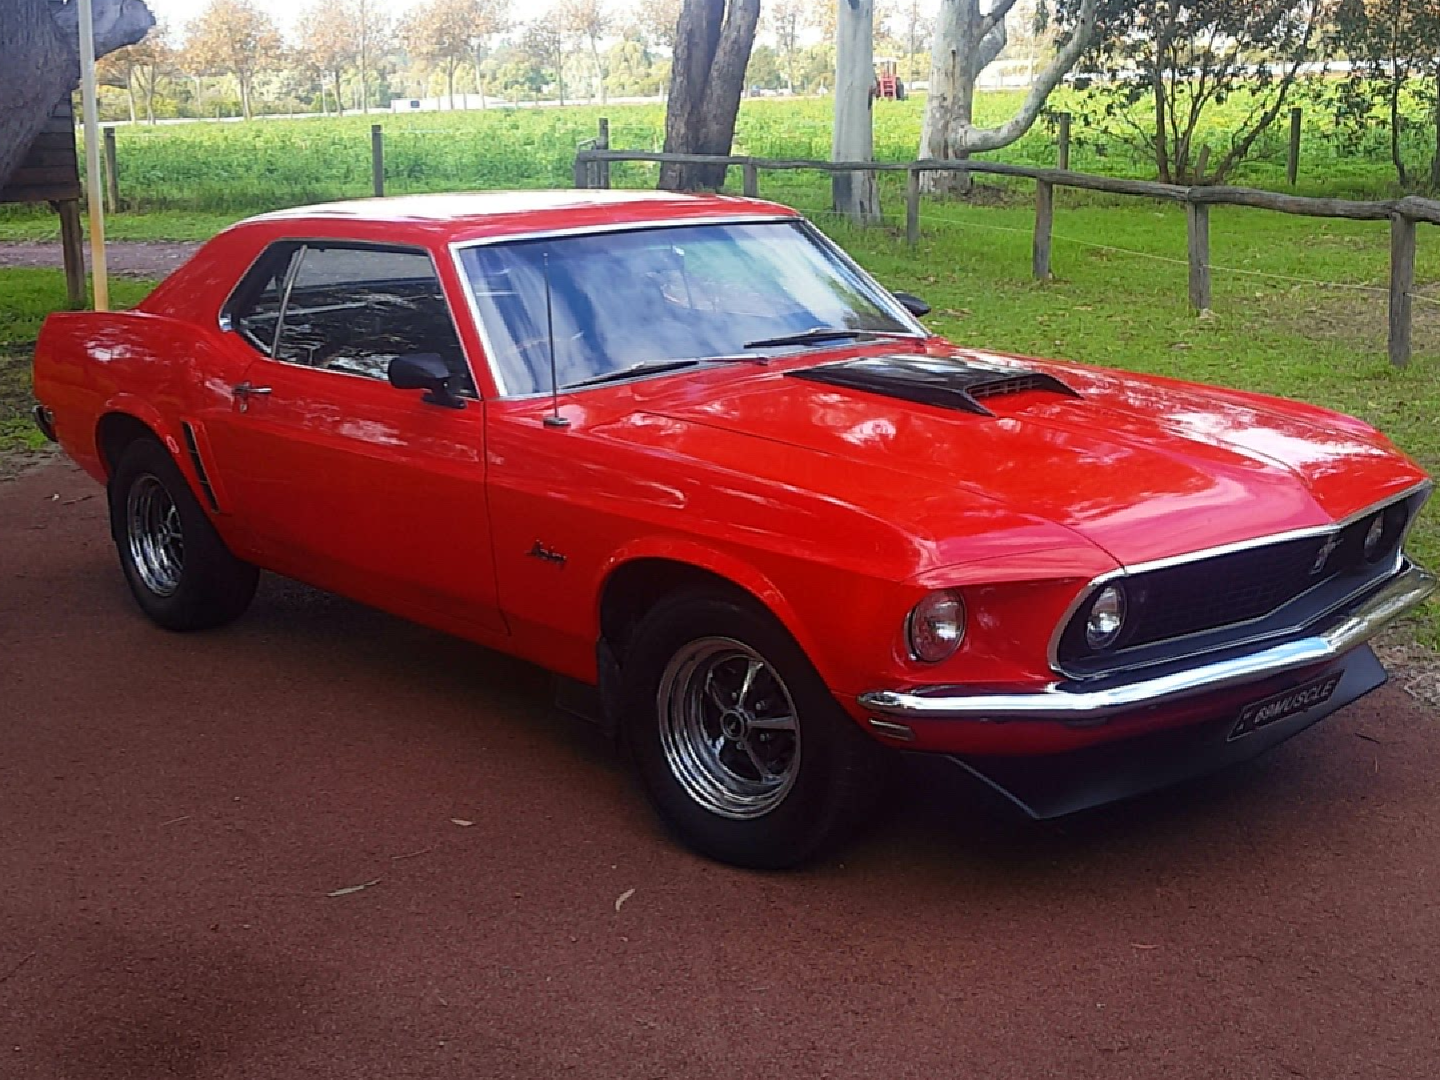 1969 Ford Mustang - 69muscle - Shannons Club